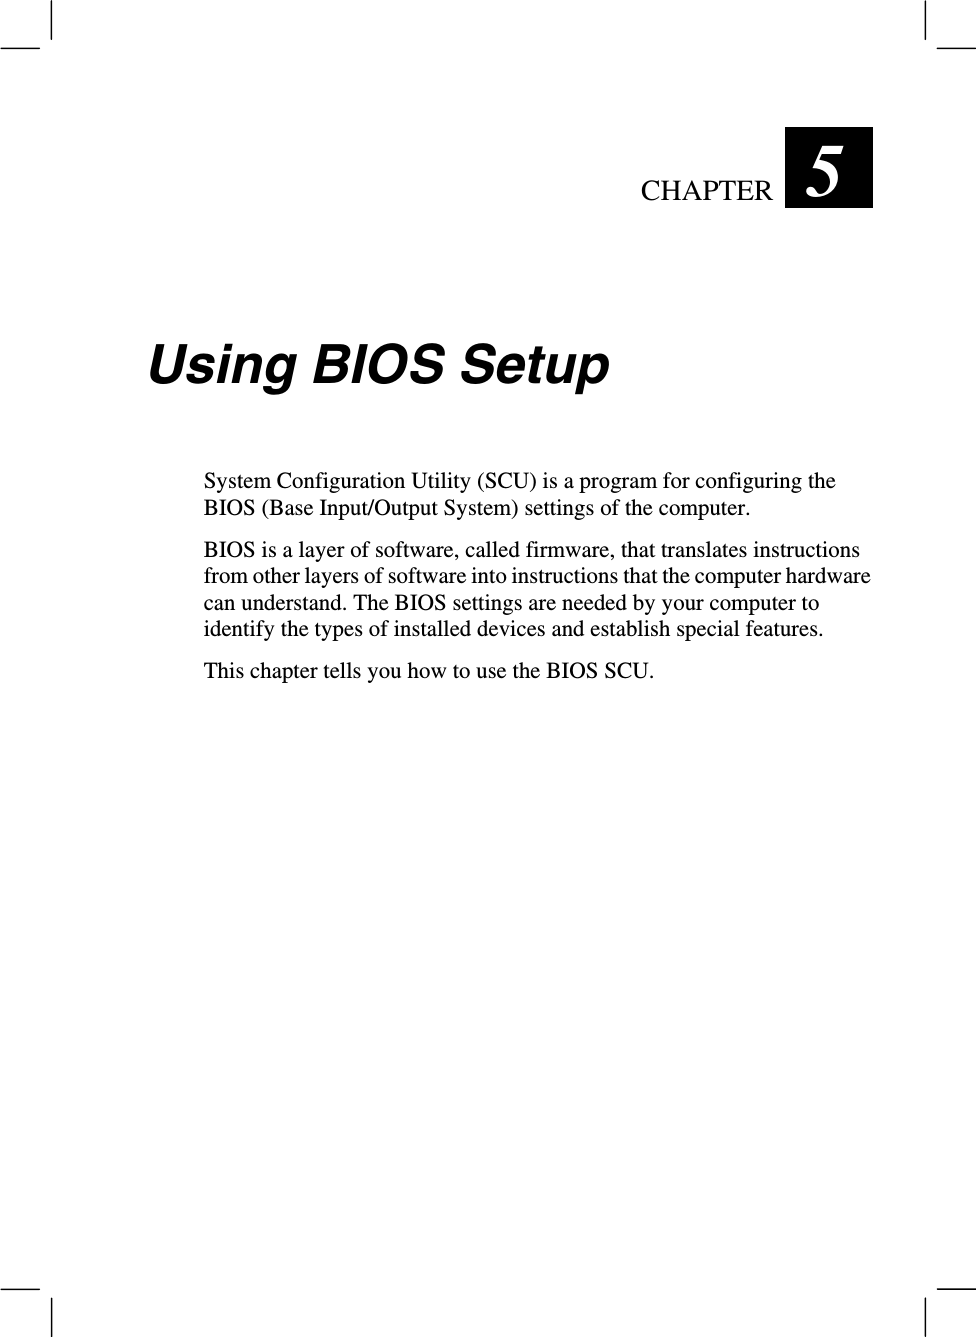 CHAPTER  5 Using BIOS SetupSystem Configuration Utility (SCU) is a program for configuring theBIOS (Base Input/Output System) settings of the computer.BIOS is a layer of software, called firmware, that translates instructionsfrom other layers of software into instructions that the computer hardwarecan understand. The BIOS settings are needed by your computer toidentify the types of installed devices and establish special features.This chapter tells you how to use the BIOS SCU.